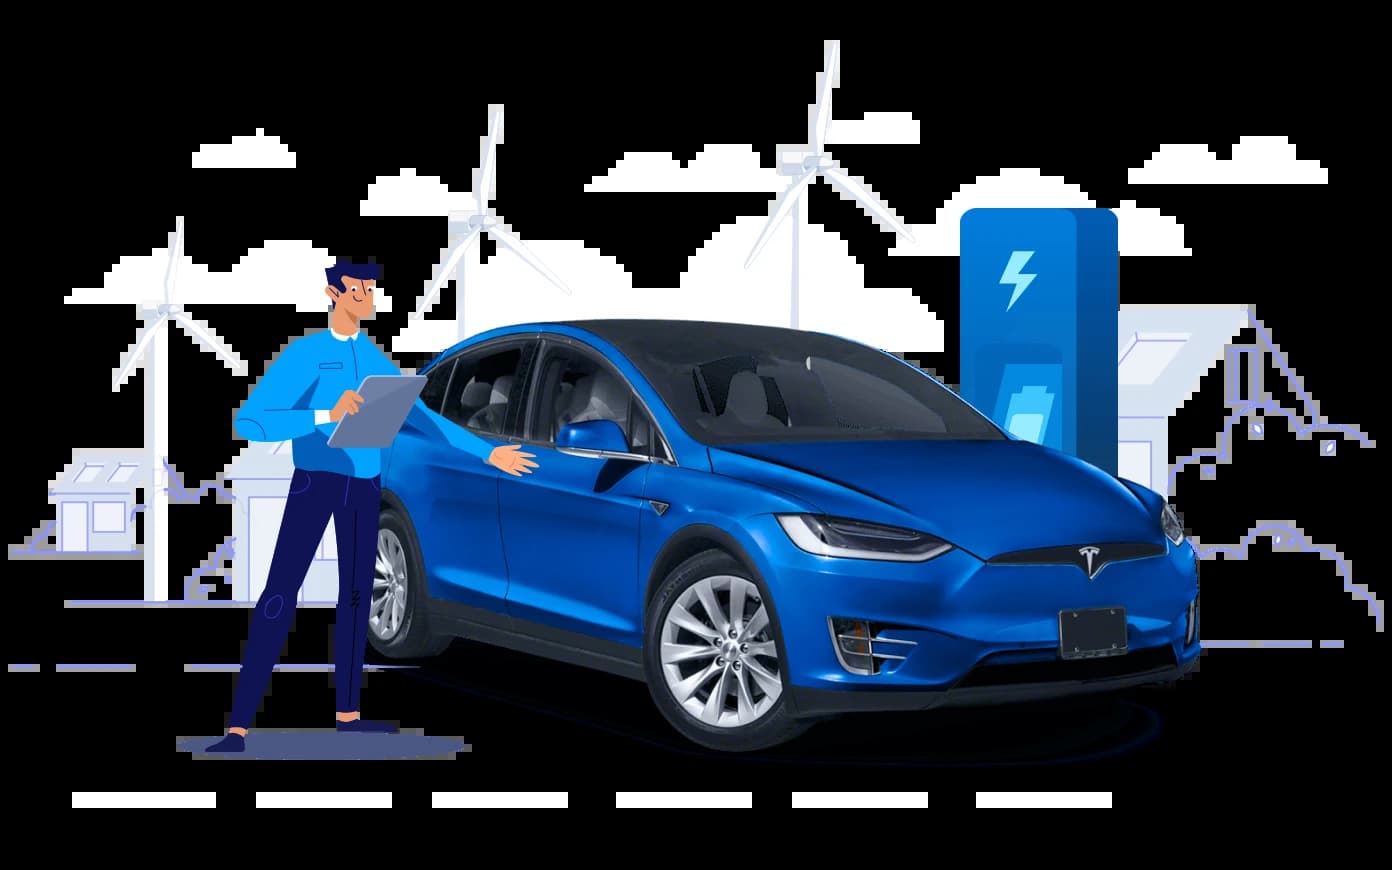 illustration of a man standing next to a Tesla at a charging station, with wind mills in the background